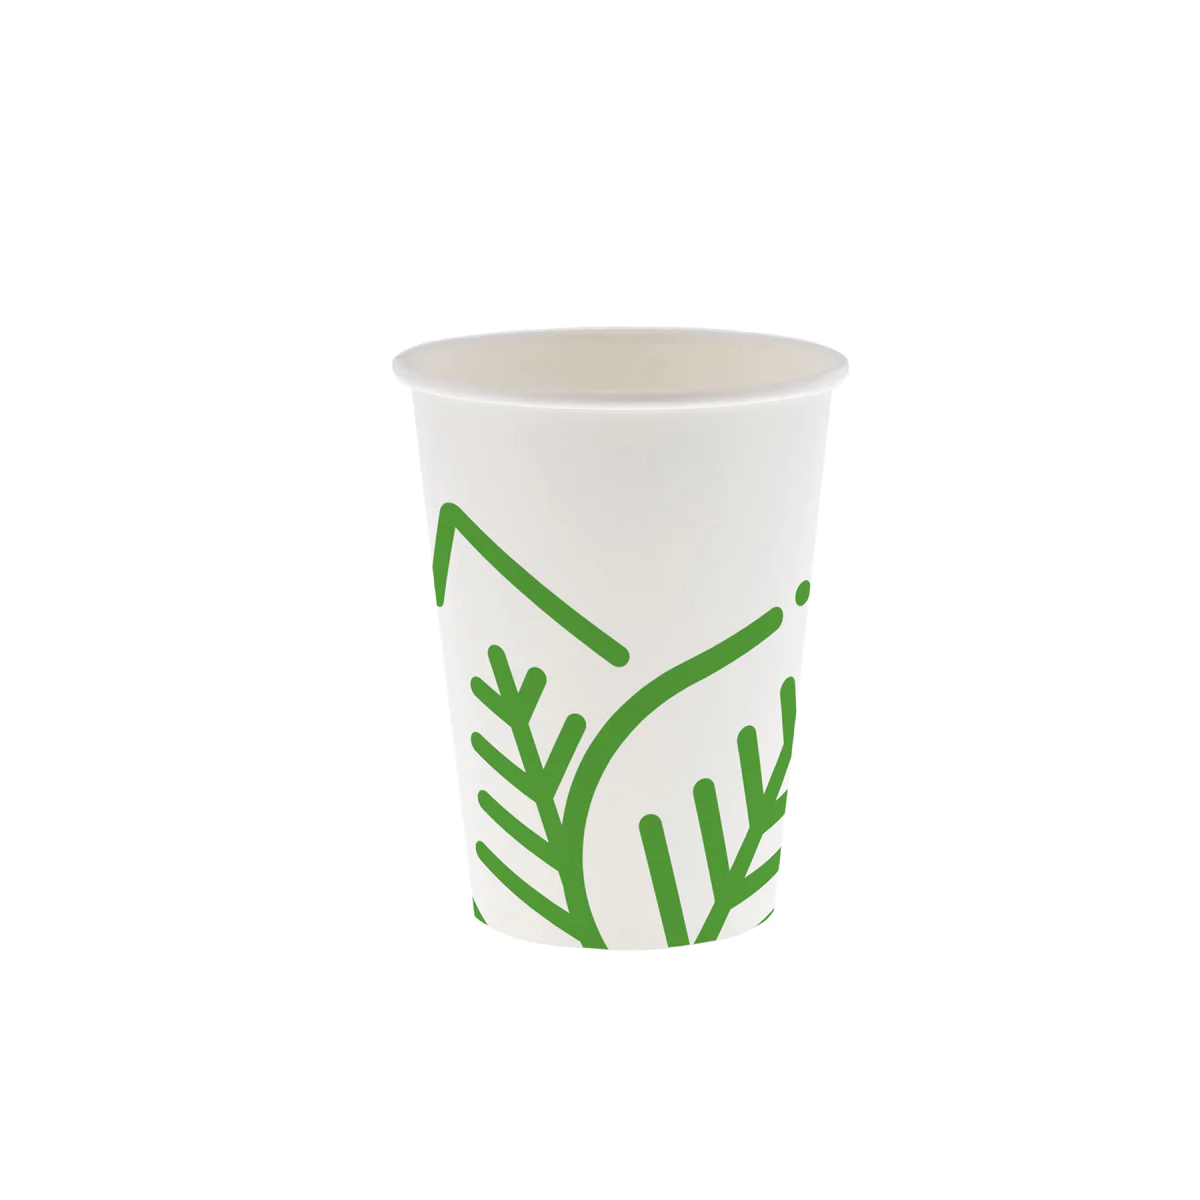 https://images.restaurantessentials.com/images/amercare-w-hc-12-12-oz-pla-lined-compostable-white-hot-cup/12501-1.jpg